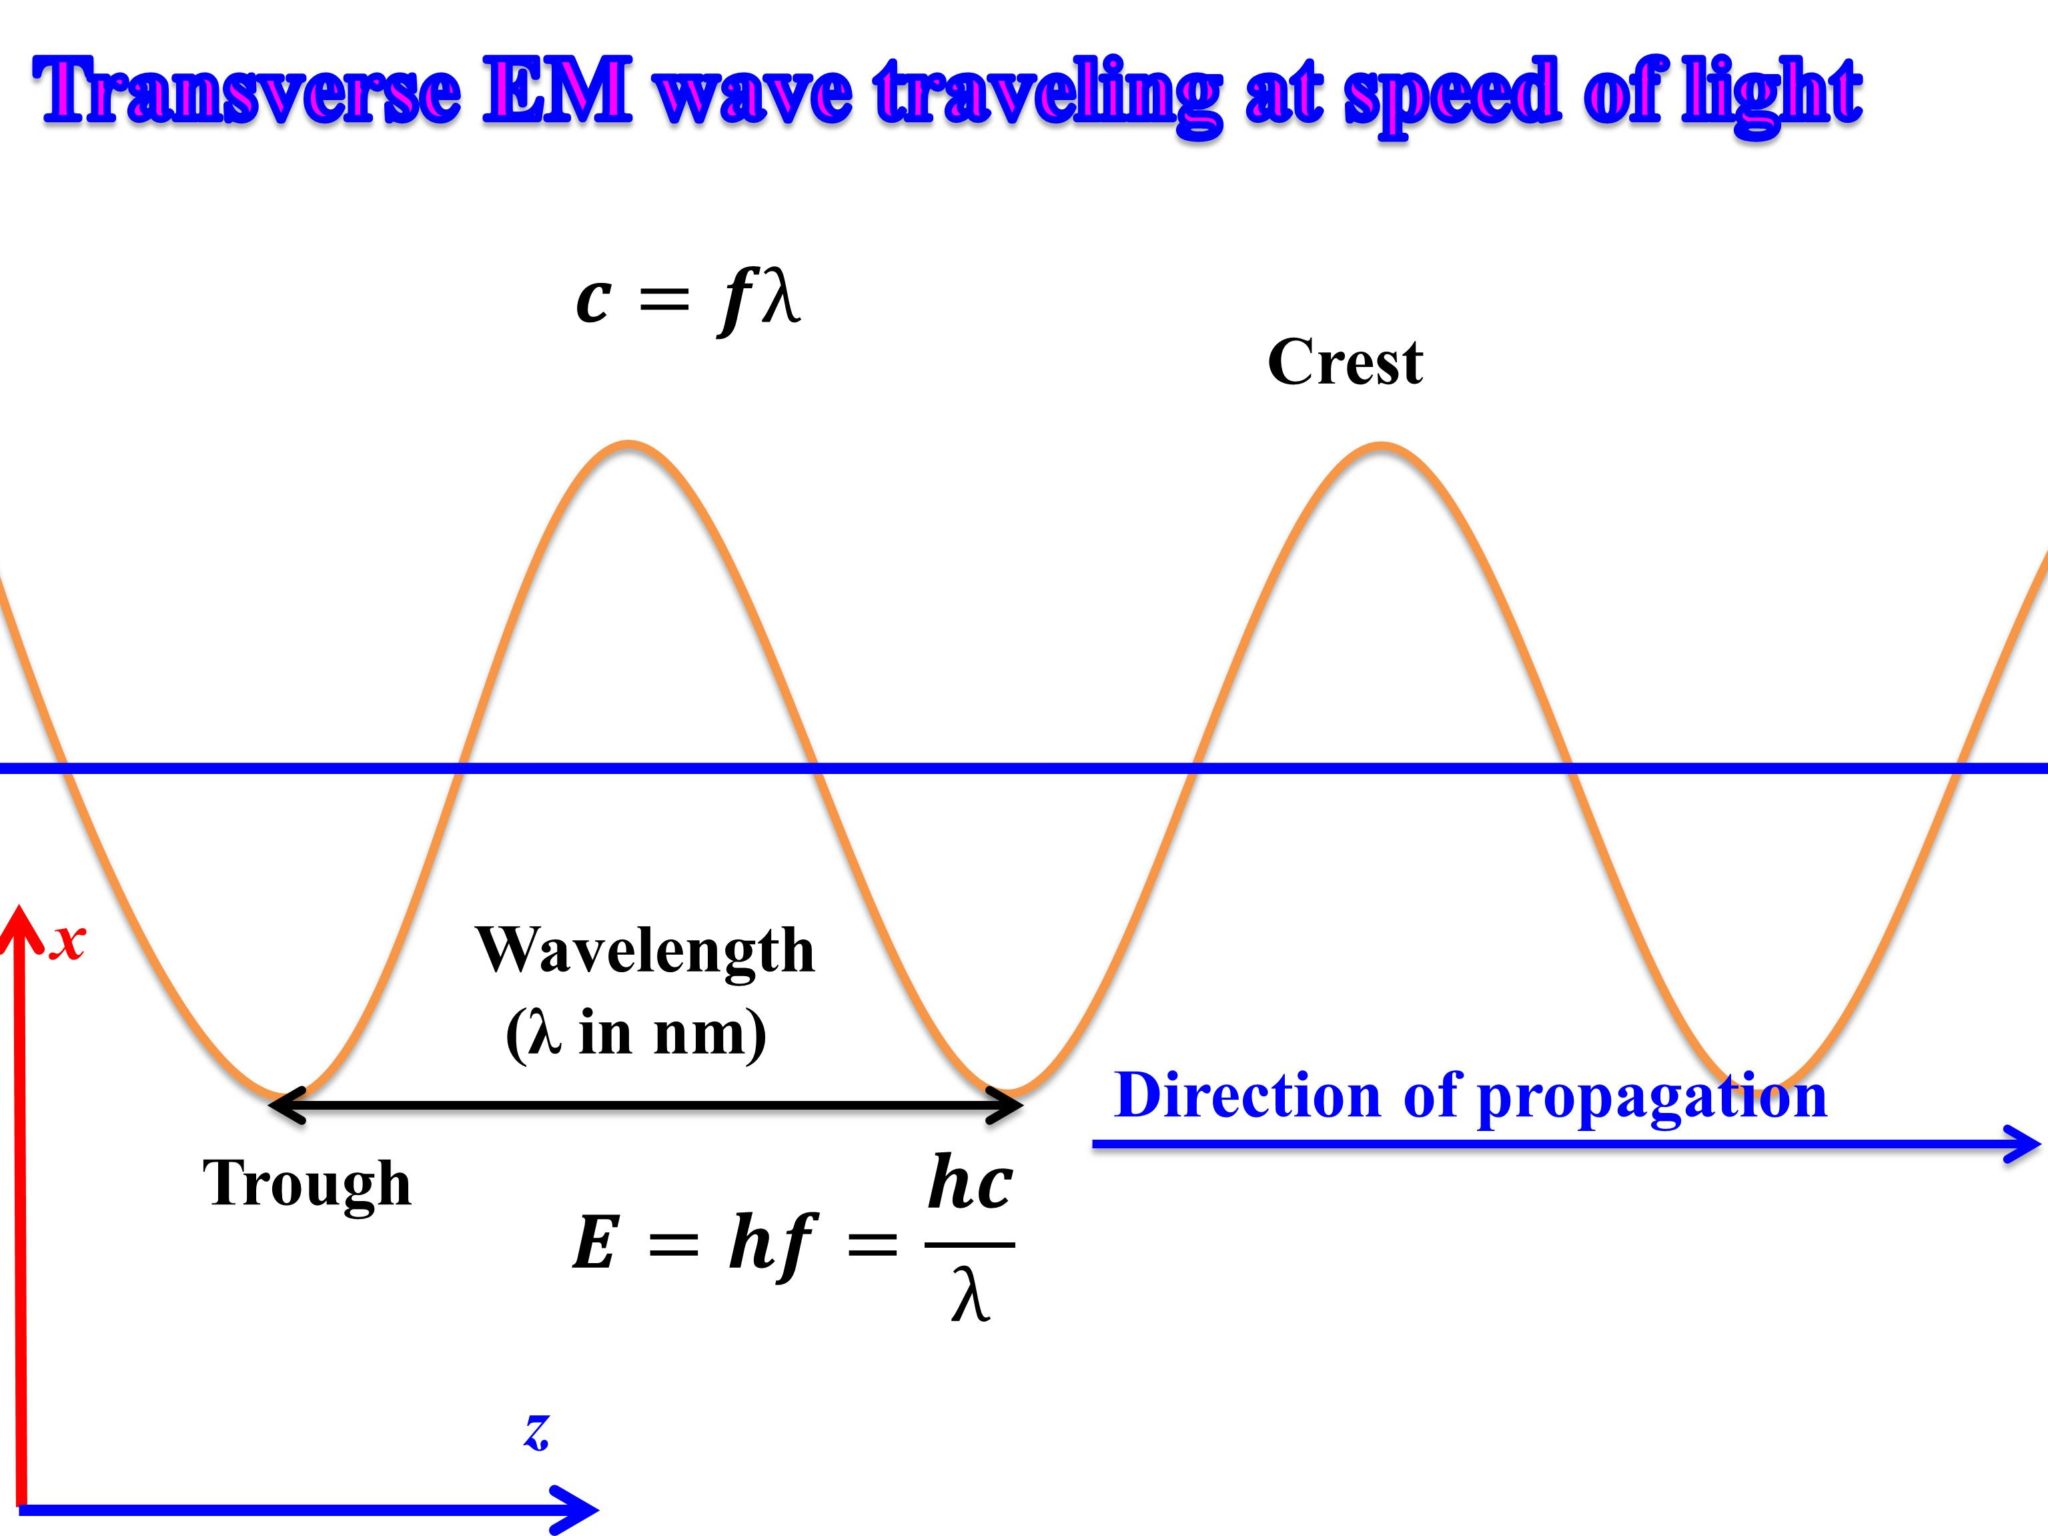 electromagnetic waves travel fastest through a vacuum and slowest through